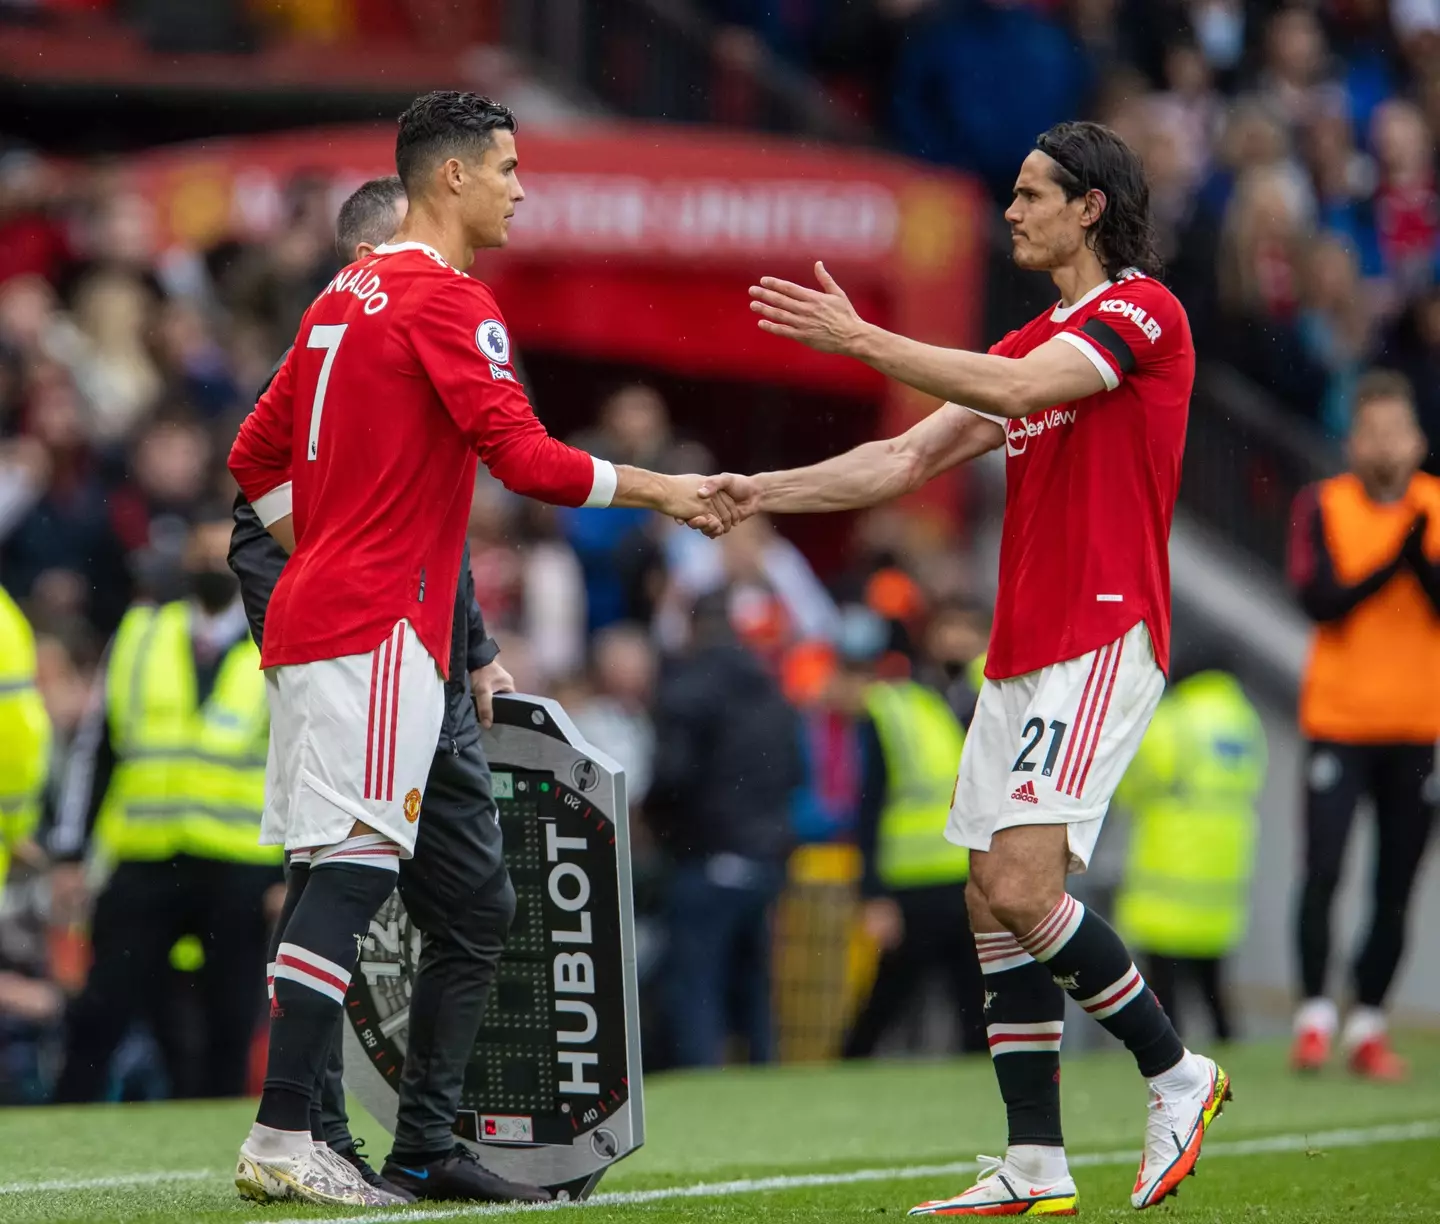 Ronaldo came on for Cavani against Everton. Image: PA Images